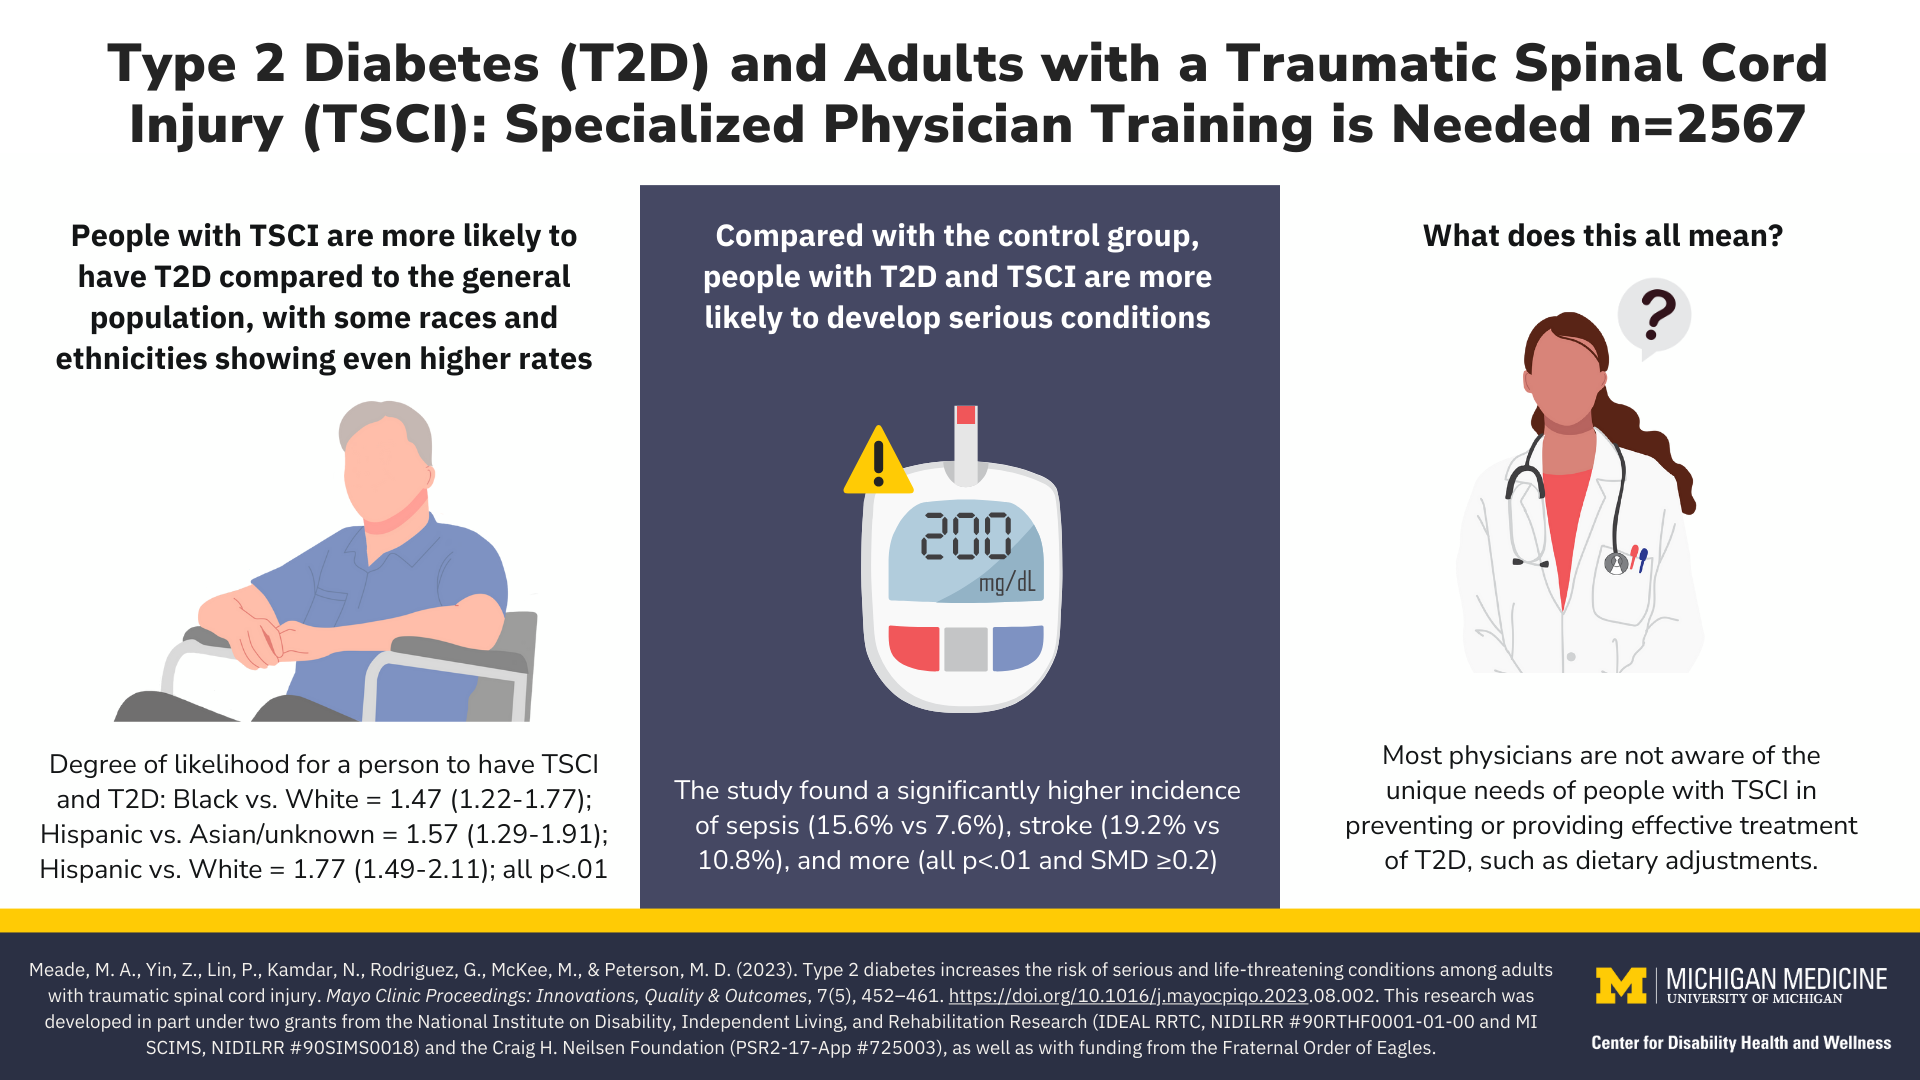 A visual abstract by the University of Michigan Center for Disability Health and Wellness discussing the effects of type 2 diabetes on adults with a traumatic spinal cord injury. For more details see post text.